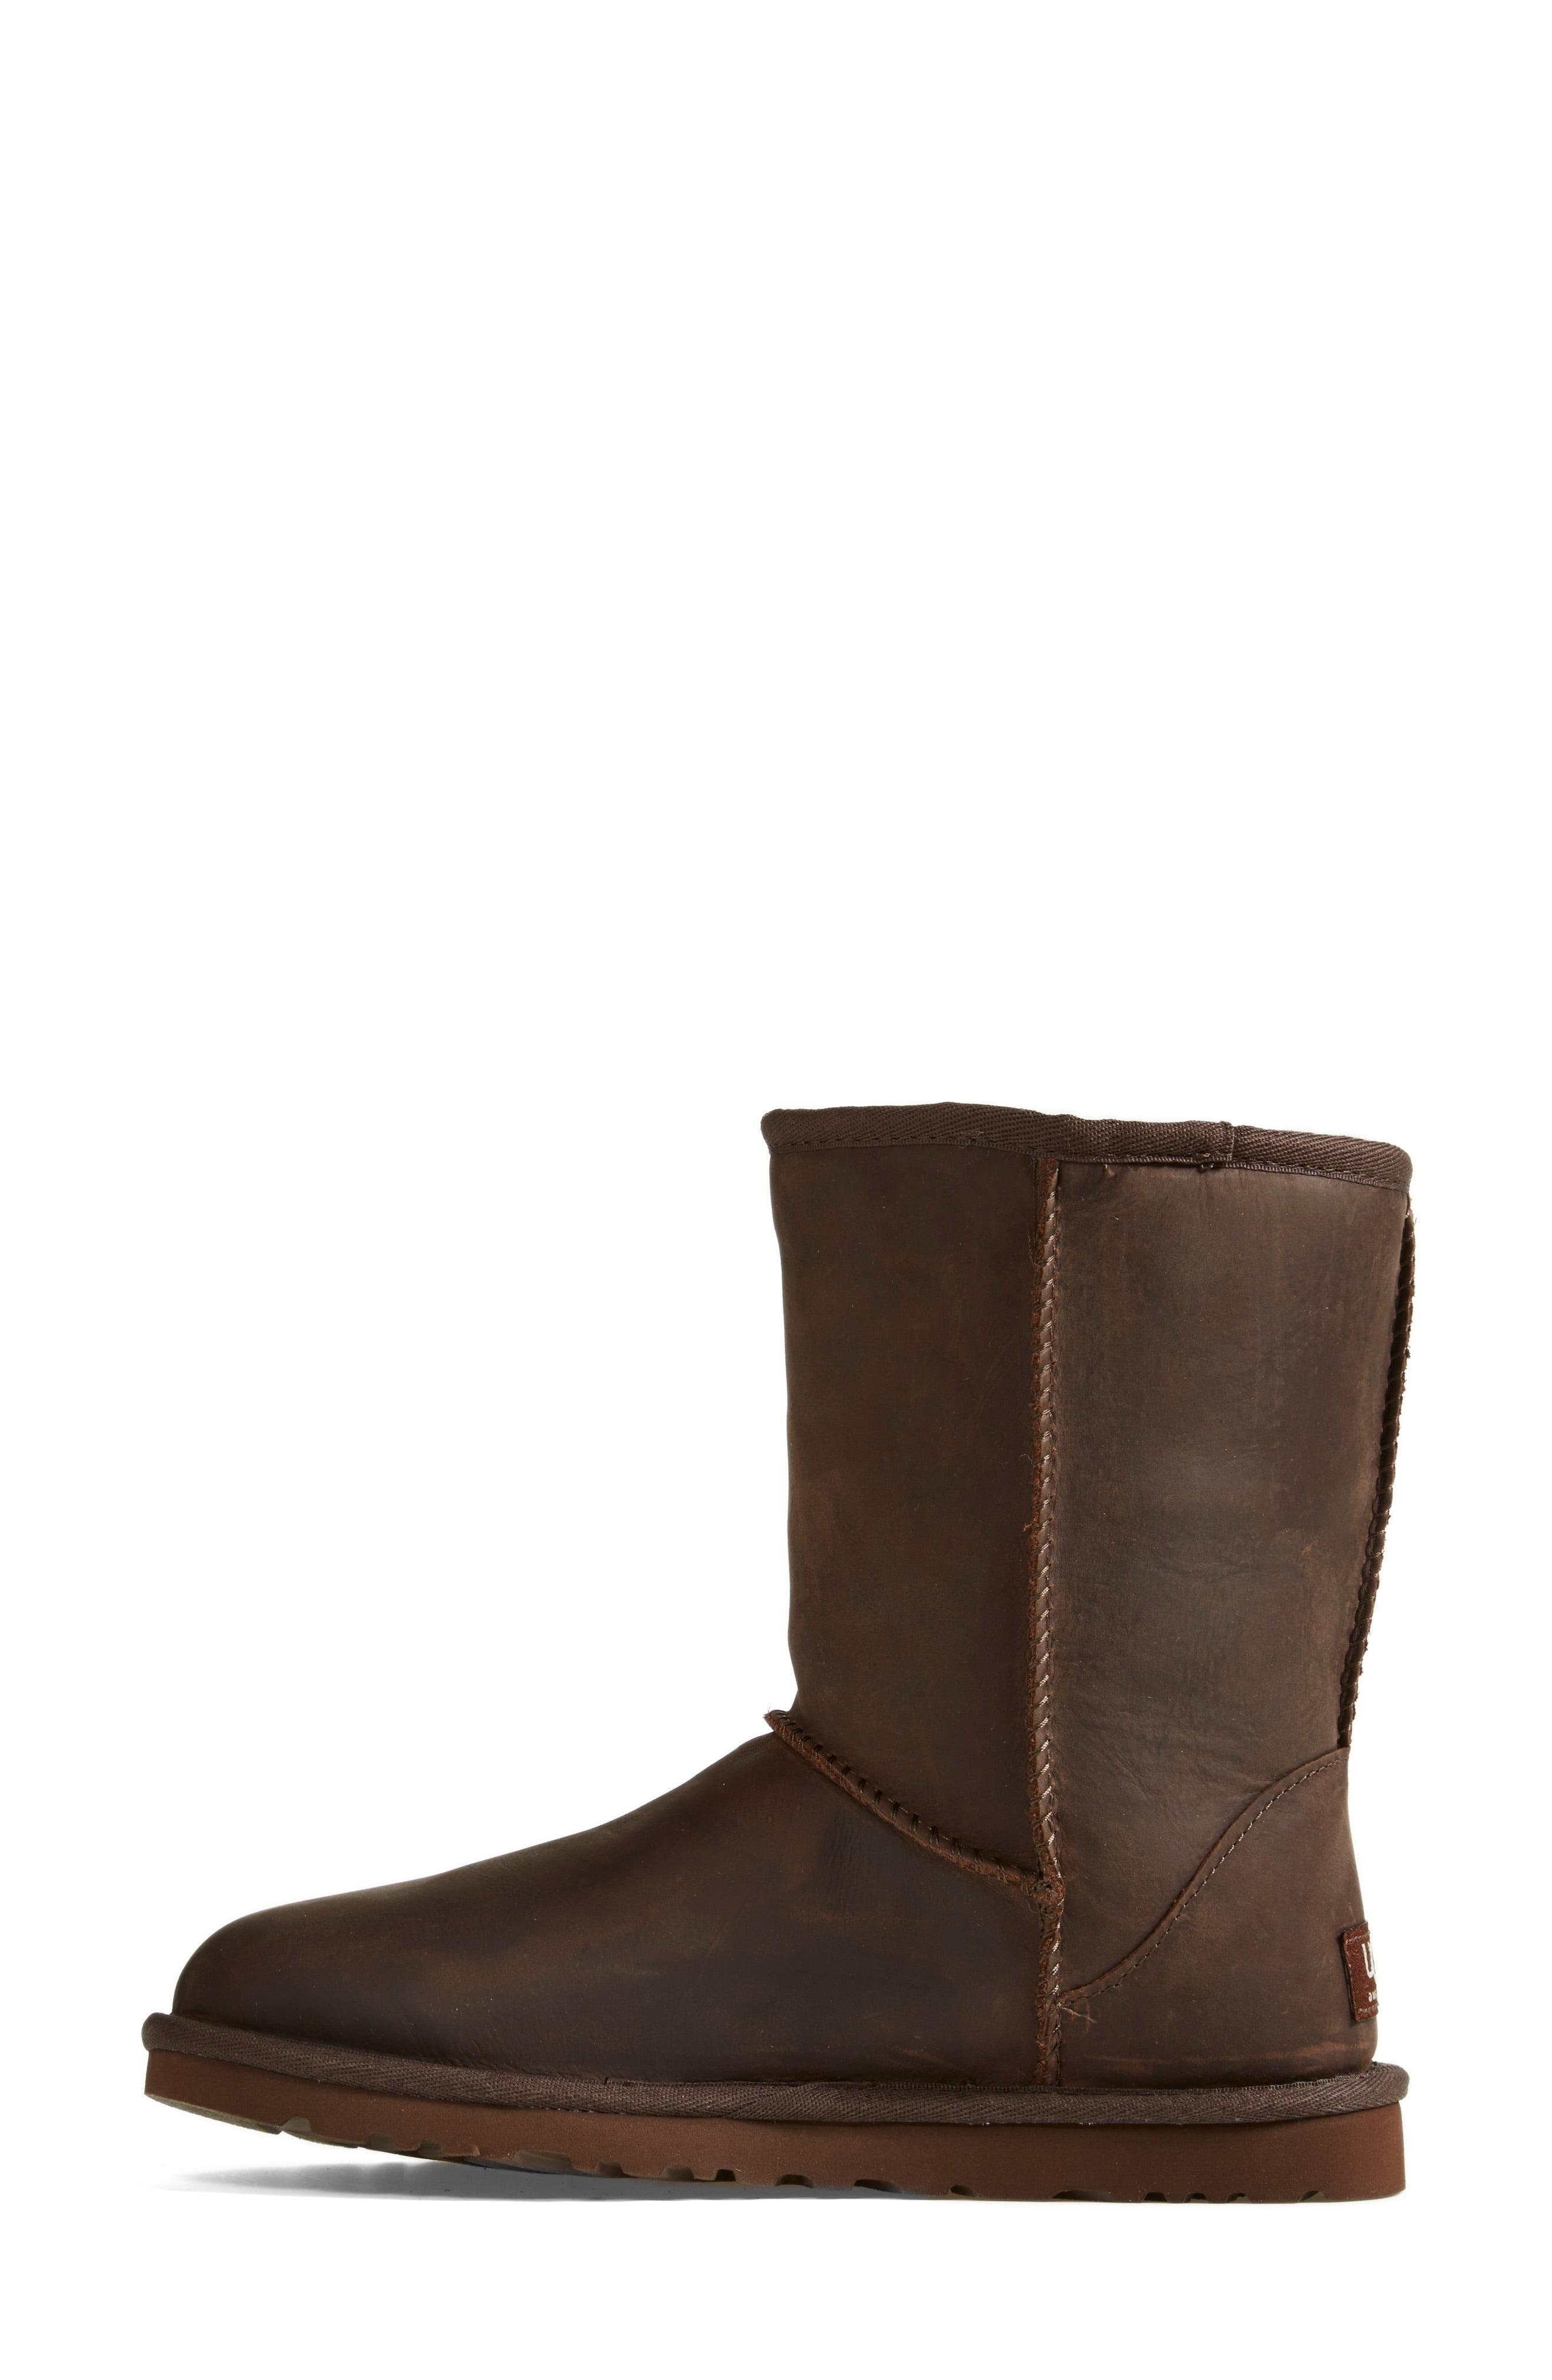 ugg short leather boots sale